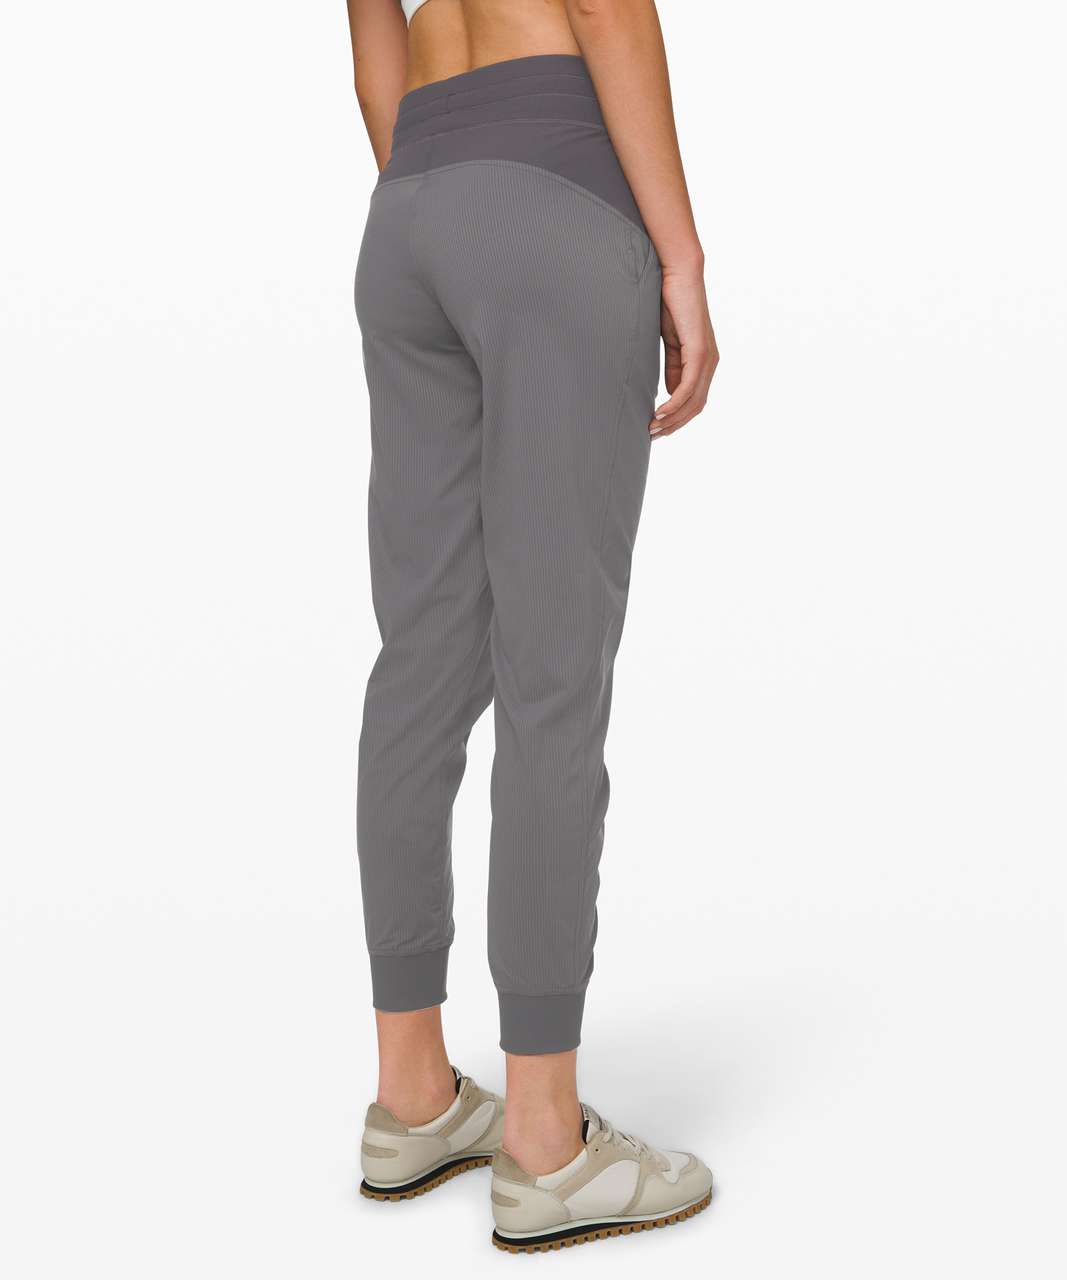 Closet Cravings - 3 pairs of Lululemon dance studio joggers just added. All  available in size 6. Link in bio